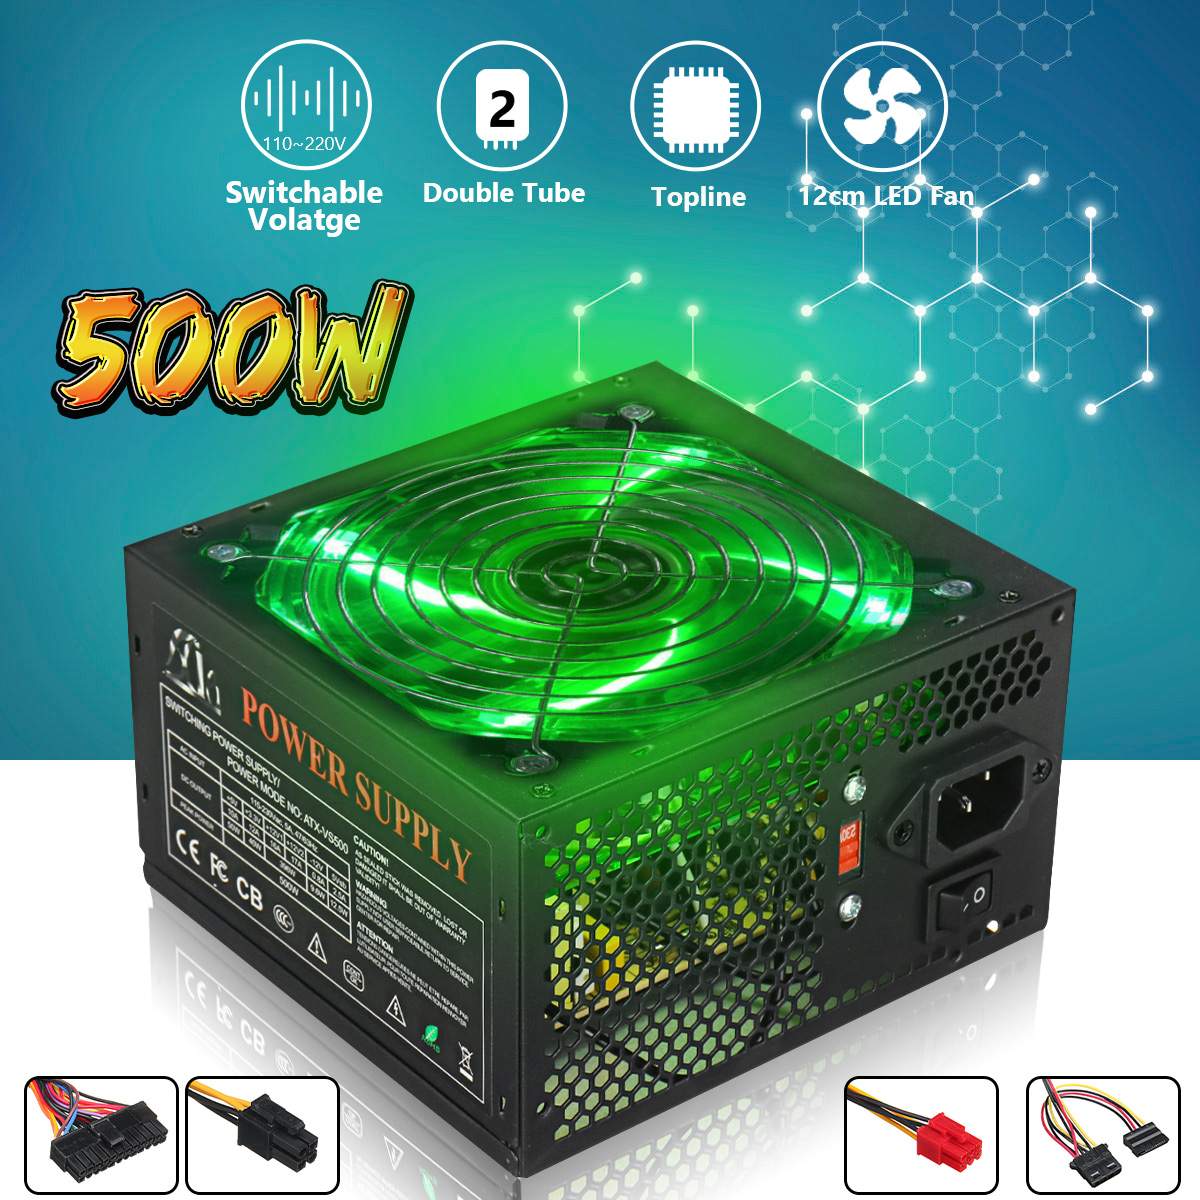 Max 500W Voeding 120Mm Led Fan 24 Pin Pci Sata Atx 12V Pc Computer Voeding voor Desktop Gaming Computer